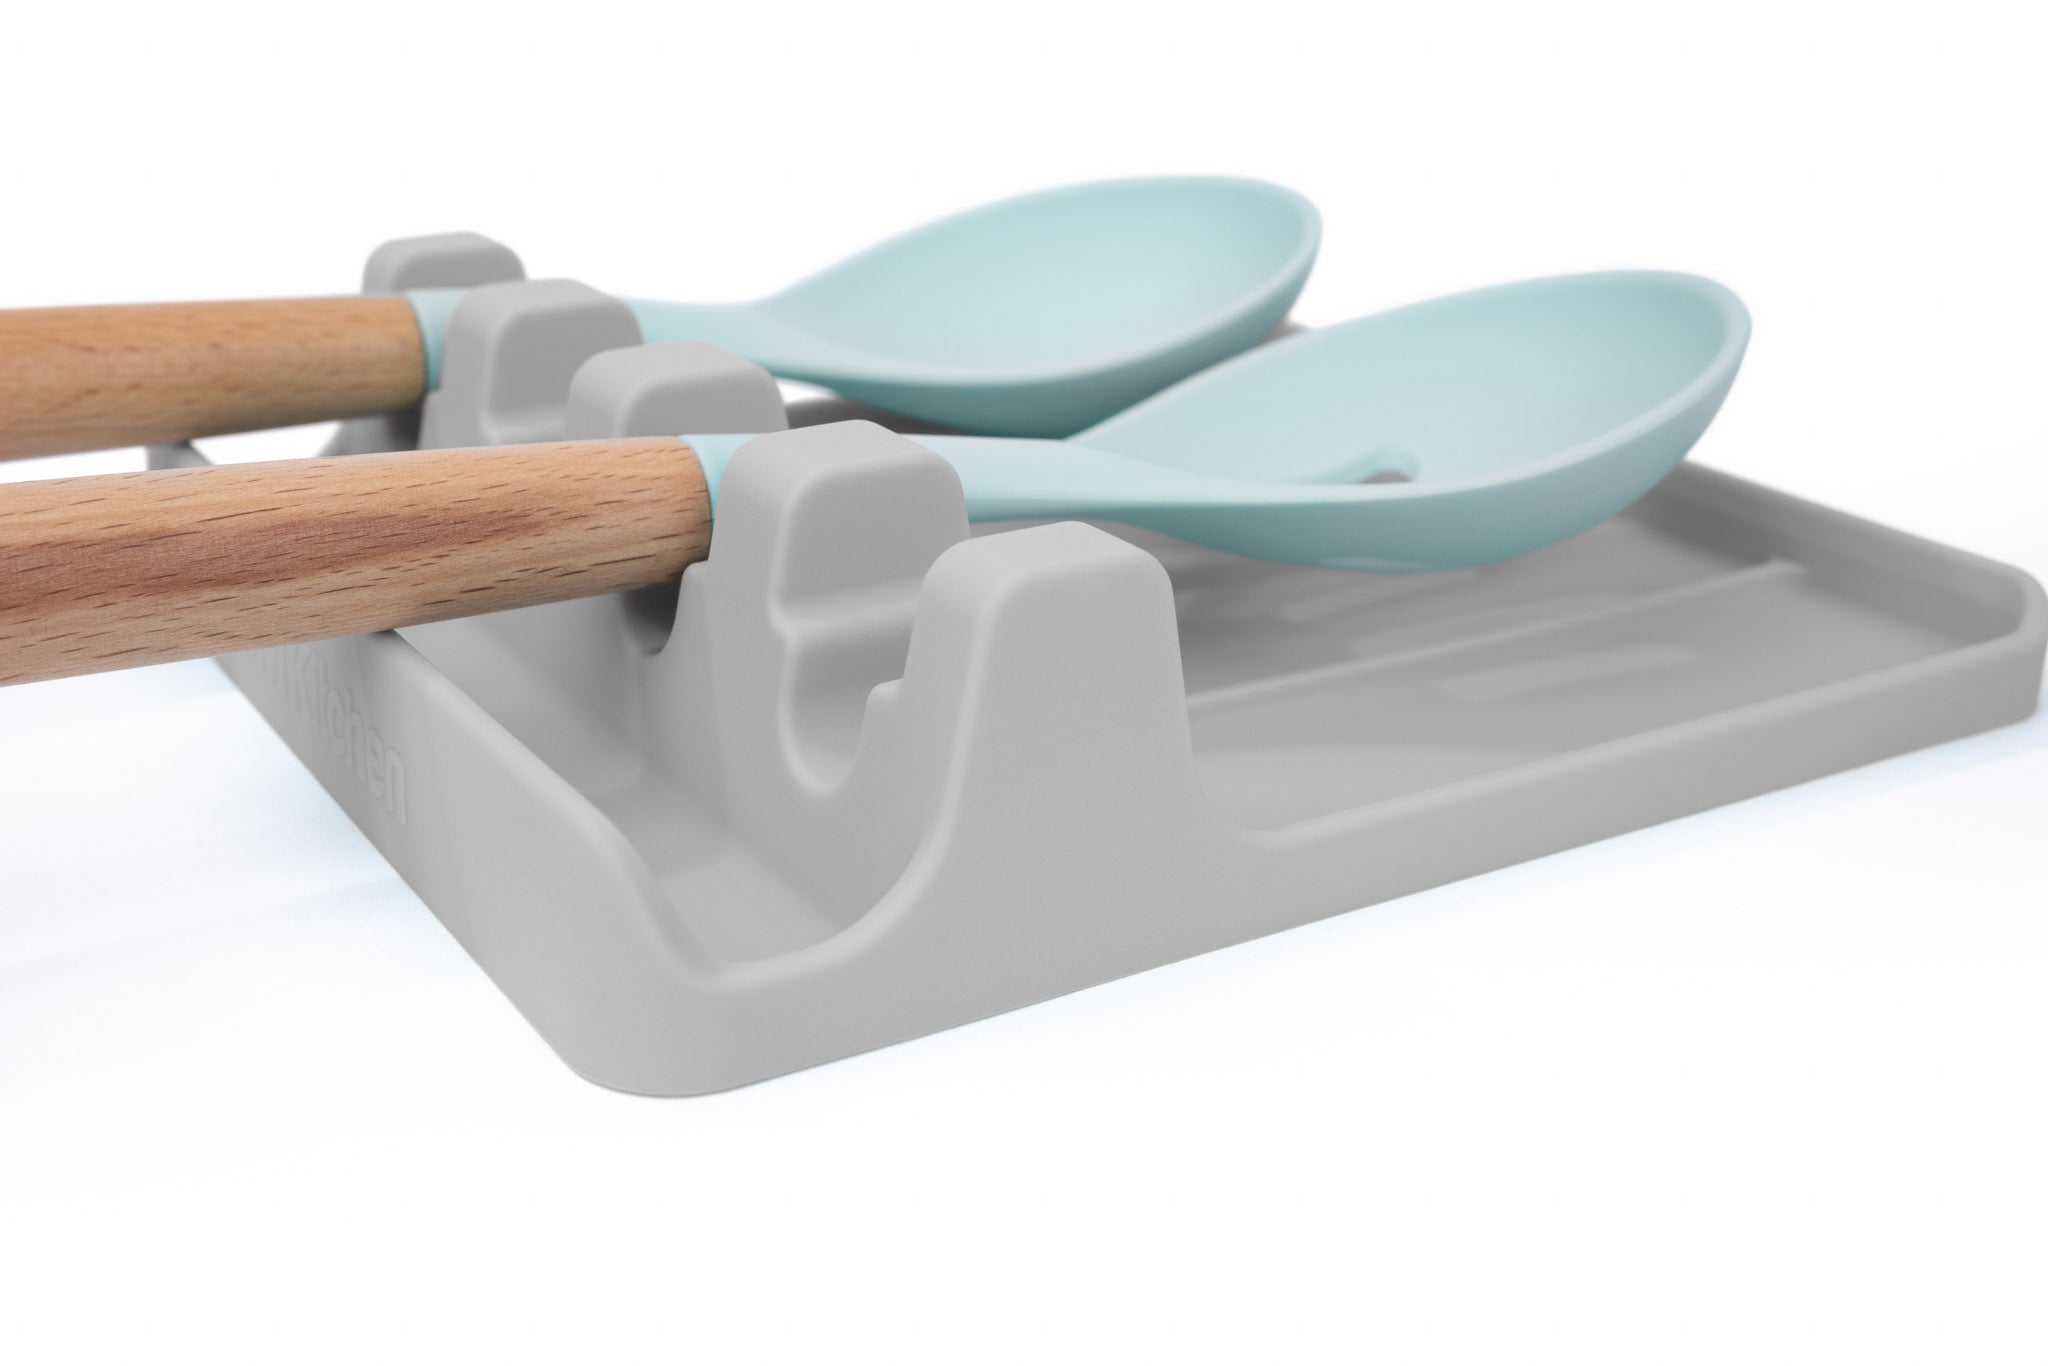  UHMER Silicone Utensil Rest with Drip Pad, Large Spoon